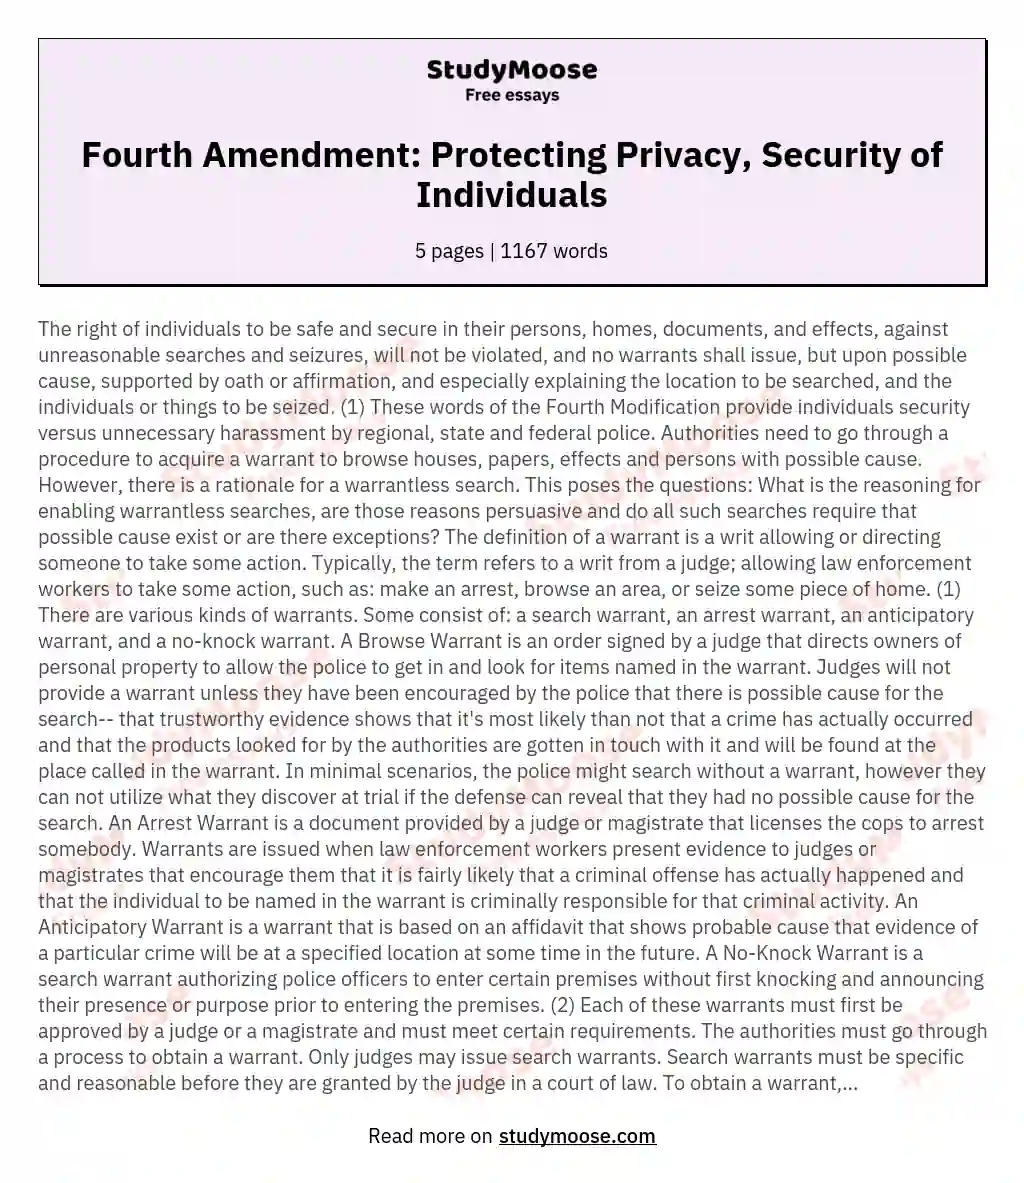 Fourth Amendment: Protecting Privacy, Security of Individuals essay